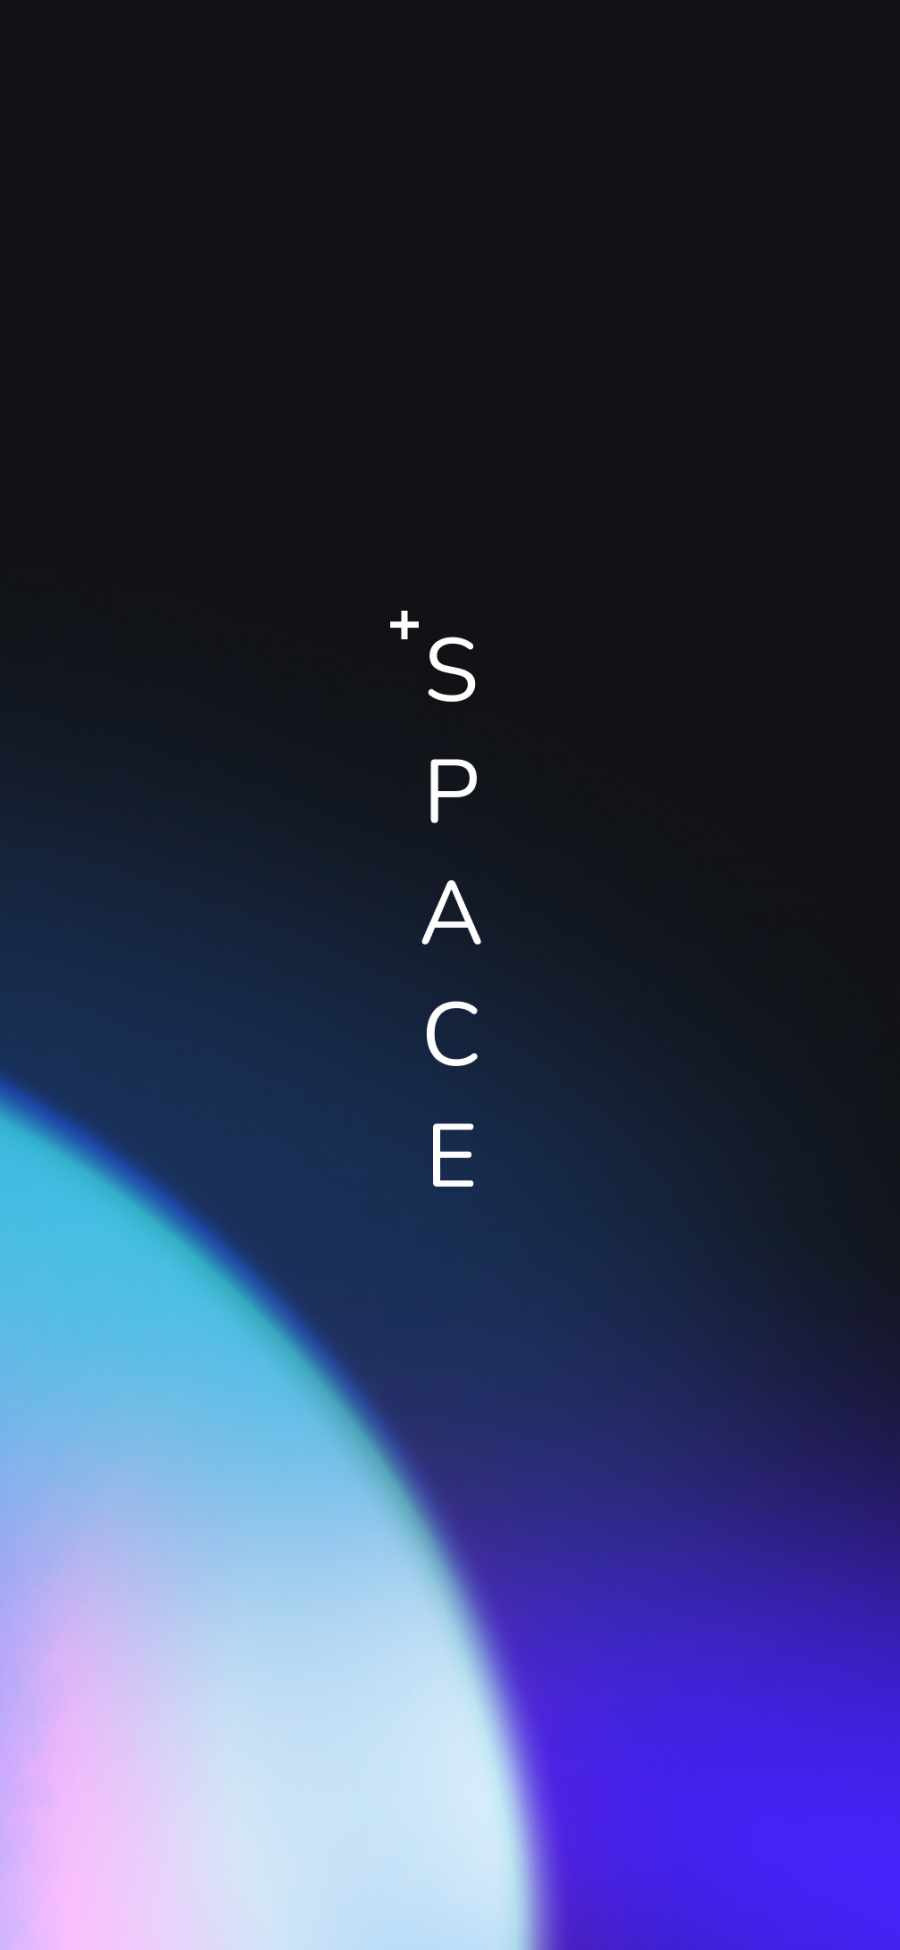 More Space IPhone Wallpaper  IPhone Wallpapers